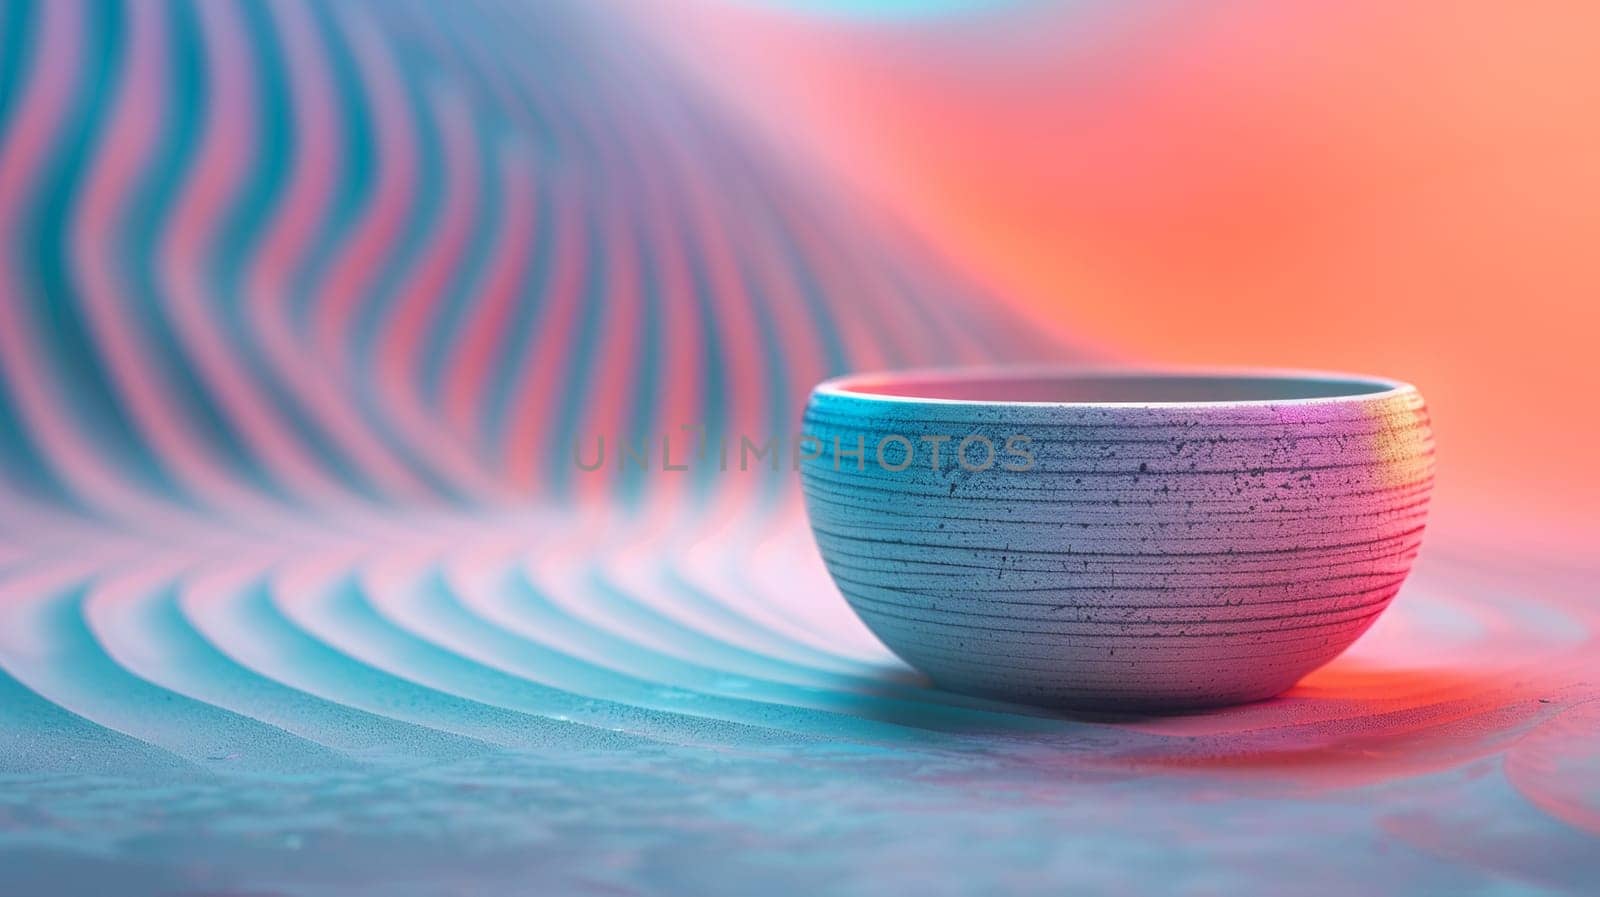 A cup sitting on a colorful background with waves in the foreground